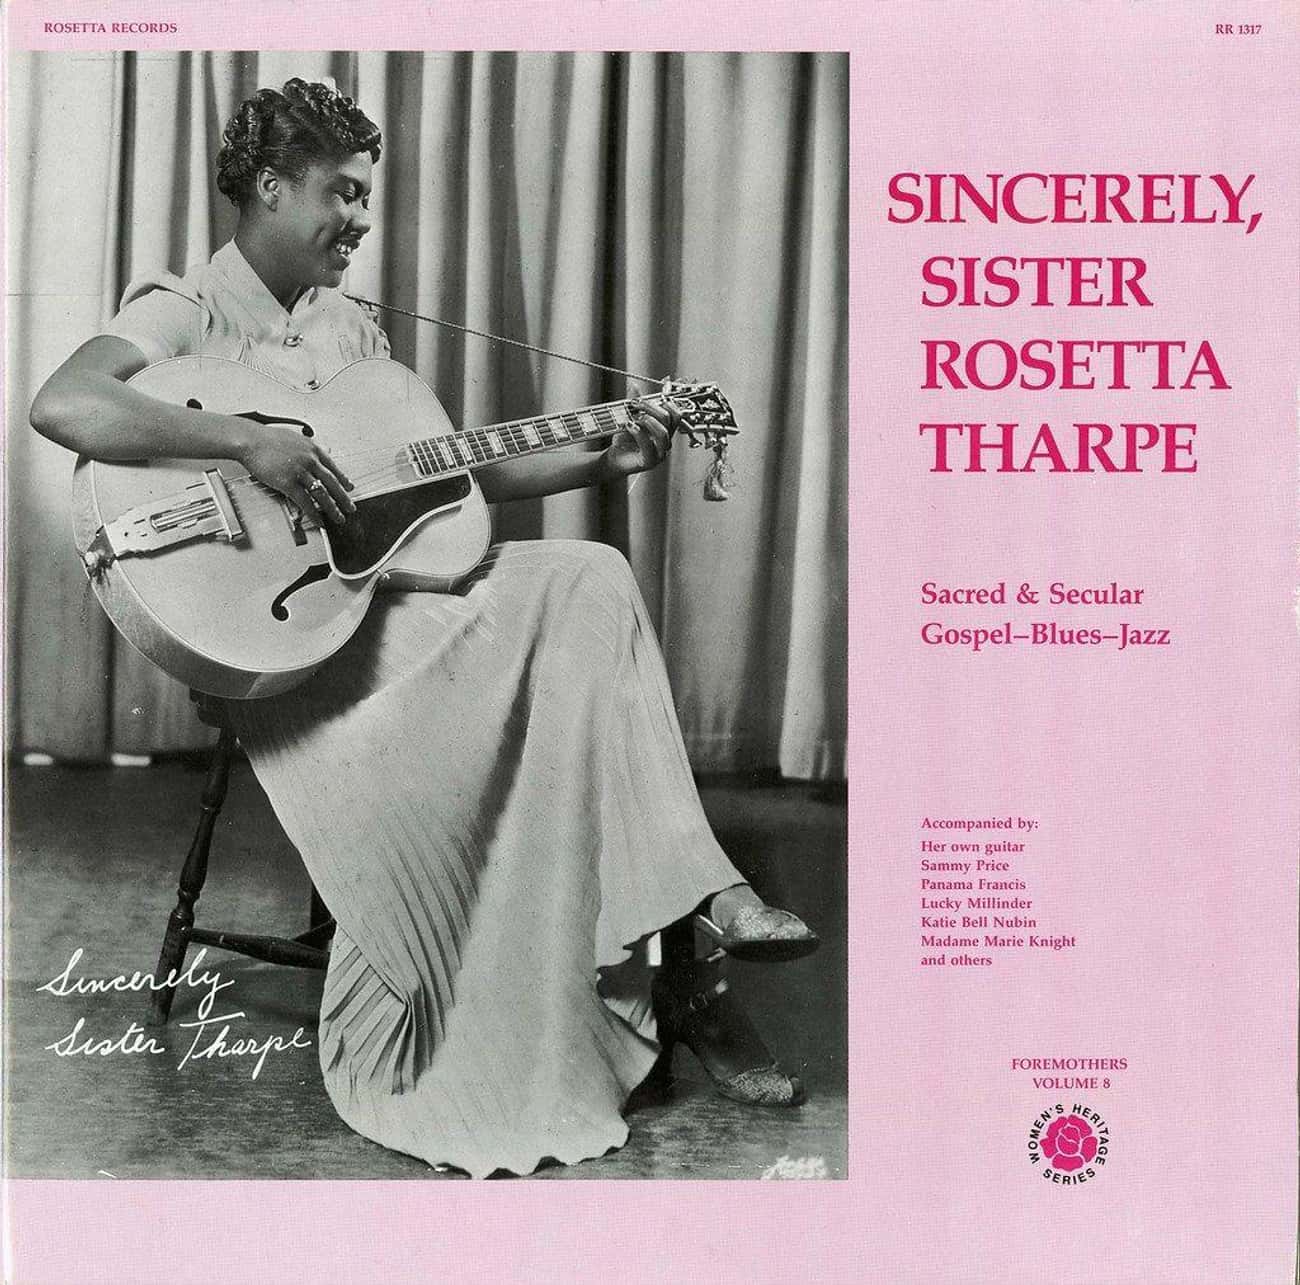 Sister Rosetta Tharpe Is Known As The 'Godmother Of Rock And Roll' For Her Pioneering Use Of The Electric Guitar